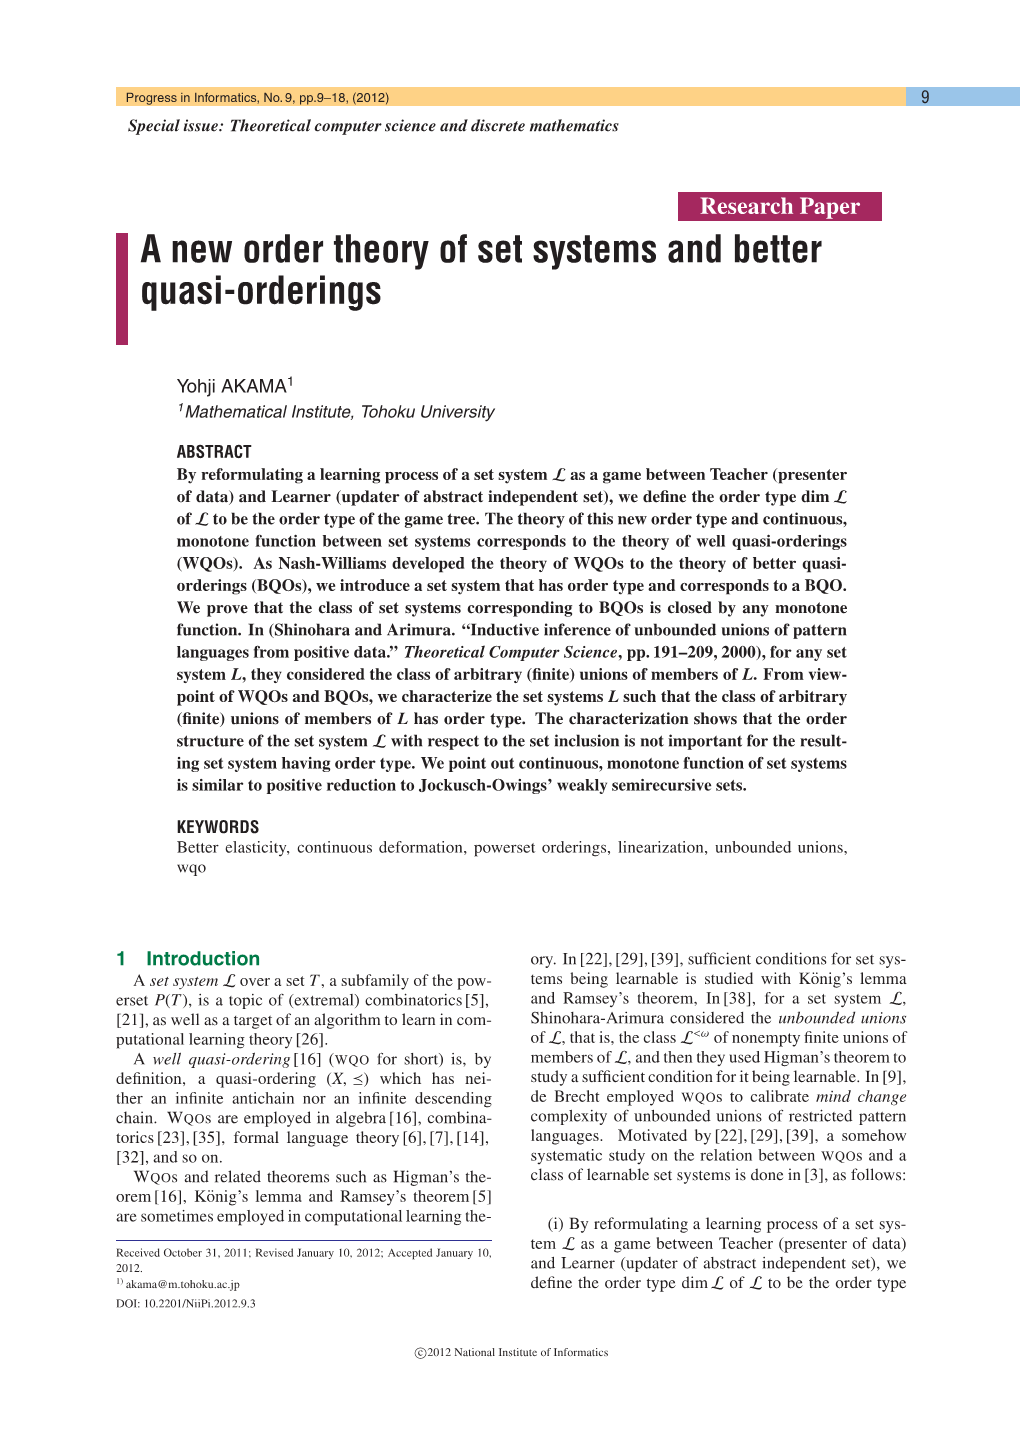 A New Order Theory of Set Systems and Better Quasi-Orderings